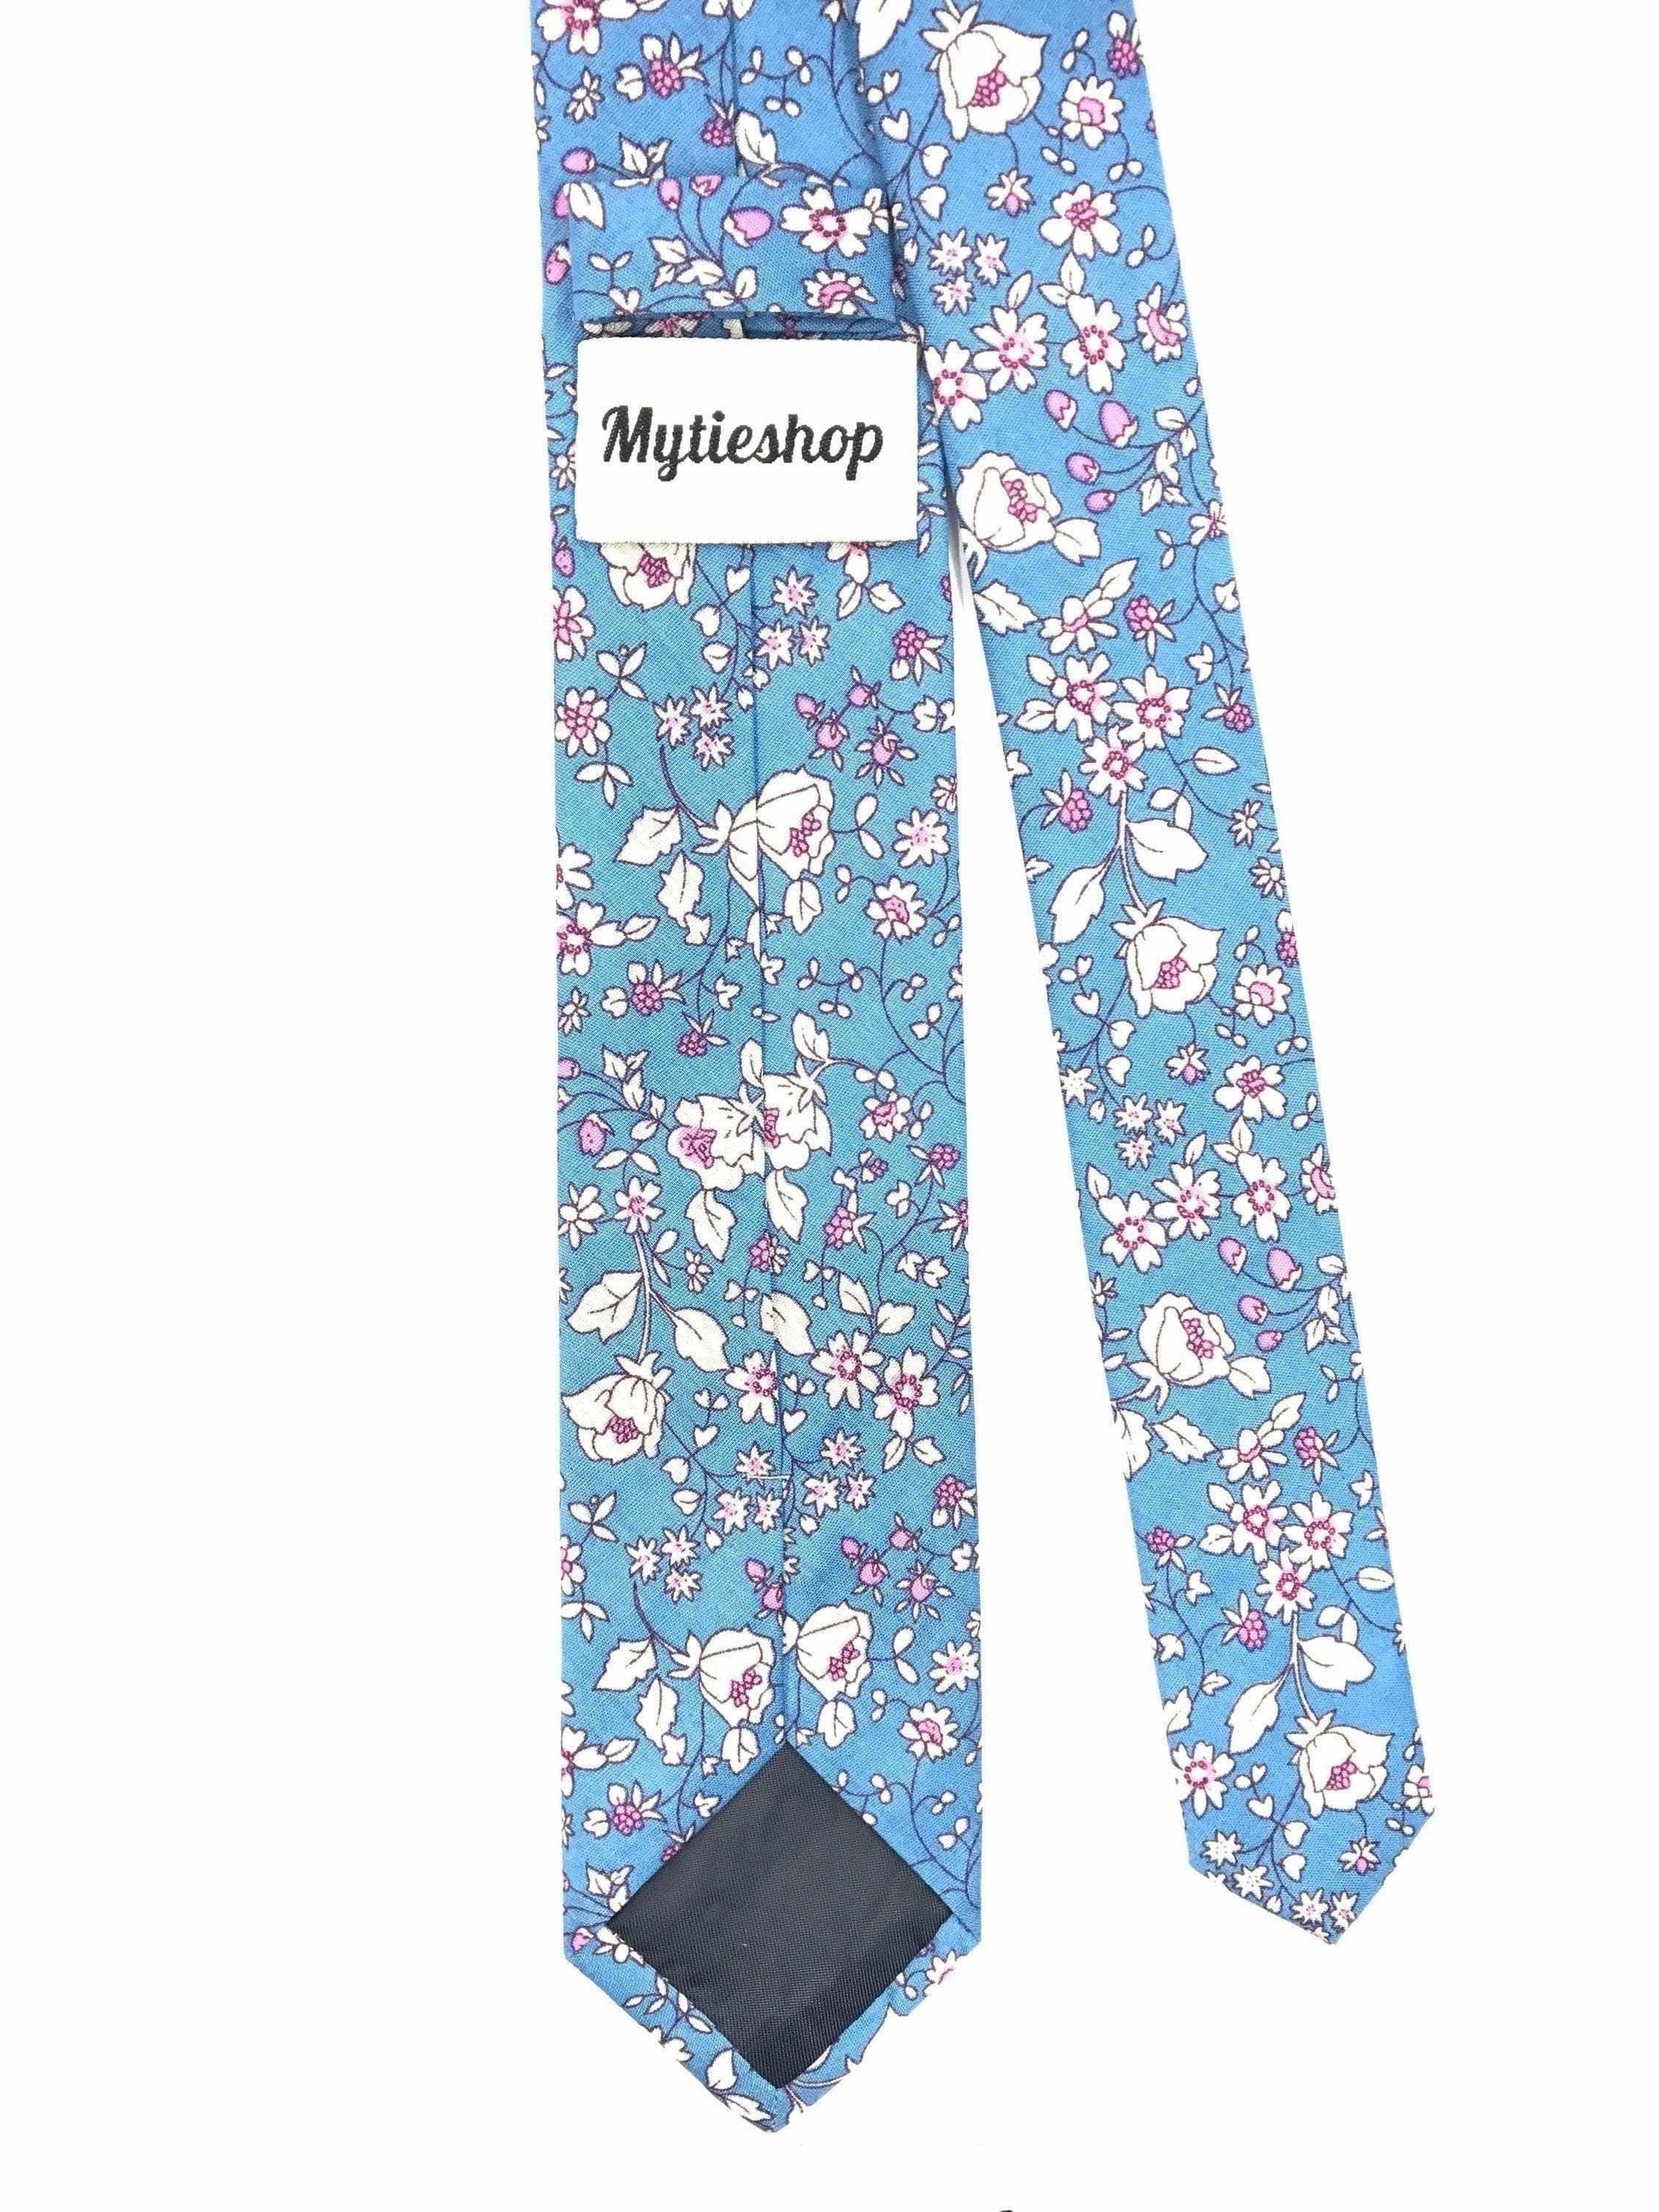 Light Blue Floral Tie Retro 2.36&quot; Mytieshop - DAISY-Neckties-Light Blue Floral Tie Retro 2.36&quot; Mytieshop DAISY for weddings and events, great for prom and anniversary gifts. Mens floral ties near me us ties-Mytieshop. Skinny ties for weddings anniversaries. Father of bride. Groomsmen. Cool skinny neckties for men. Neckwear for prom, missions and fancy events. Gift ideas for men. Anniversaries ideas. Wedding aesthetics. Flower ties. Dry flower ties.